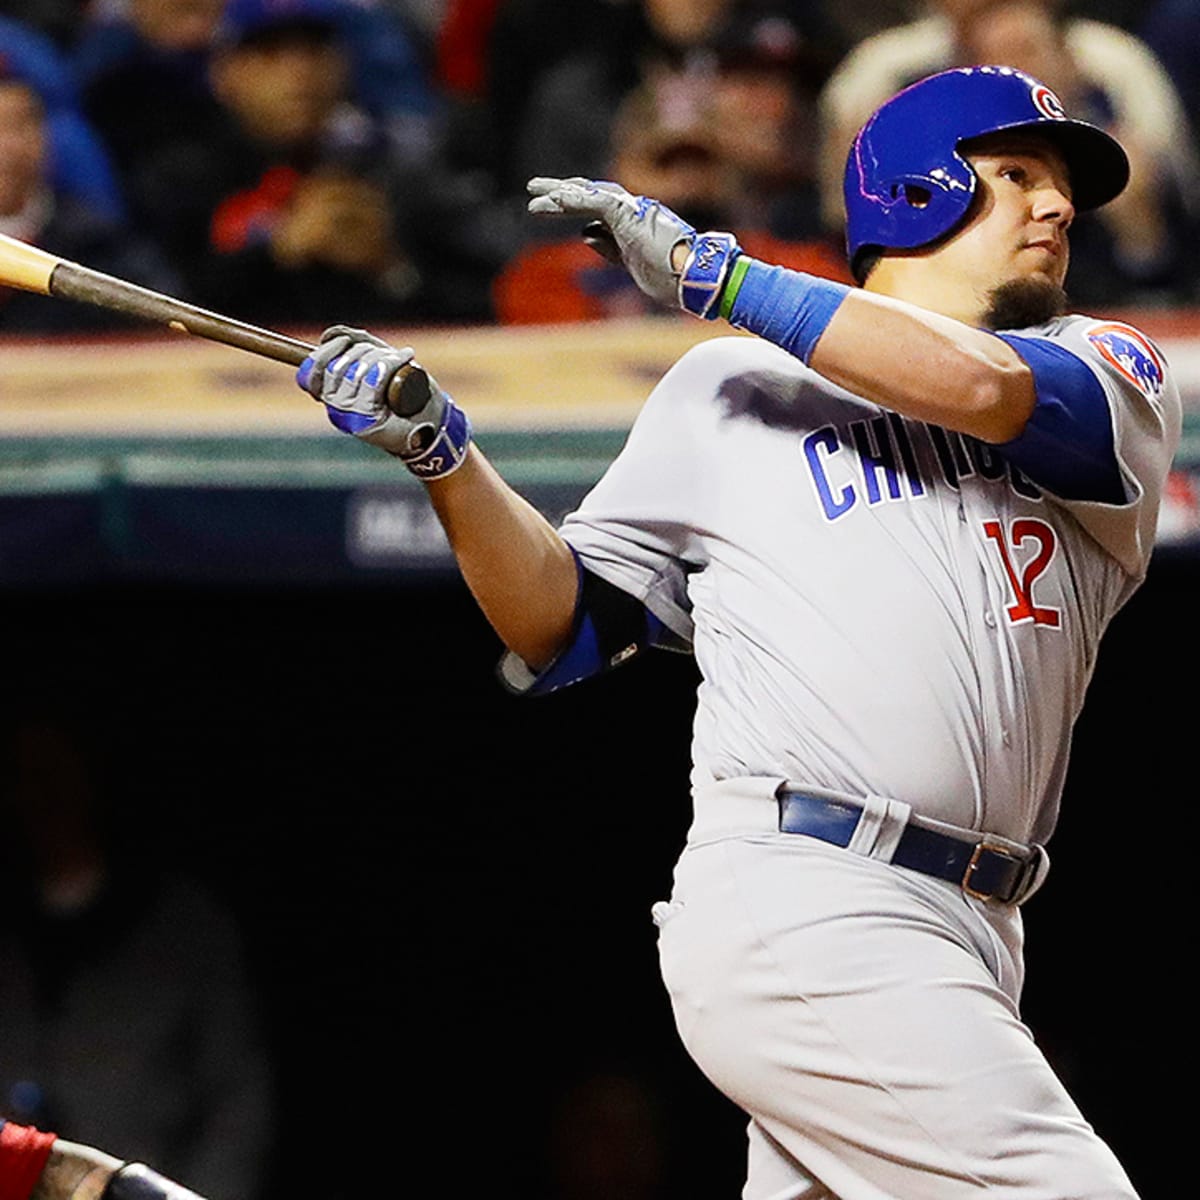 The 20 greatest home runs in Cubs history, No. 9: Kyle Schwarber